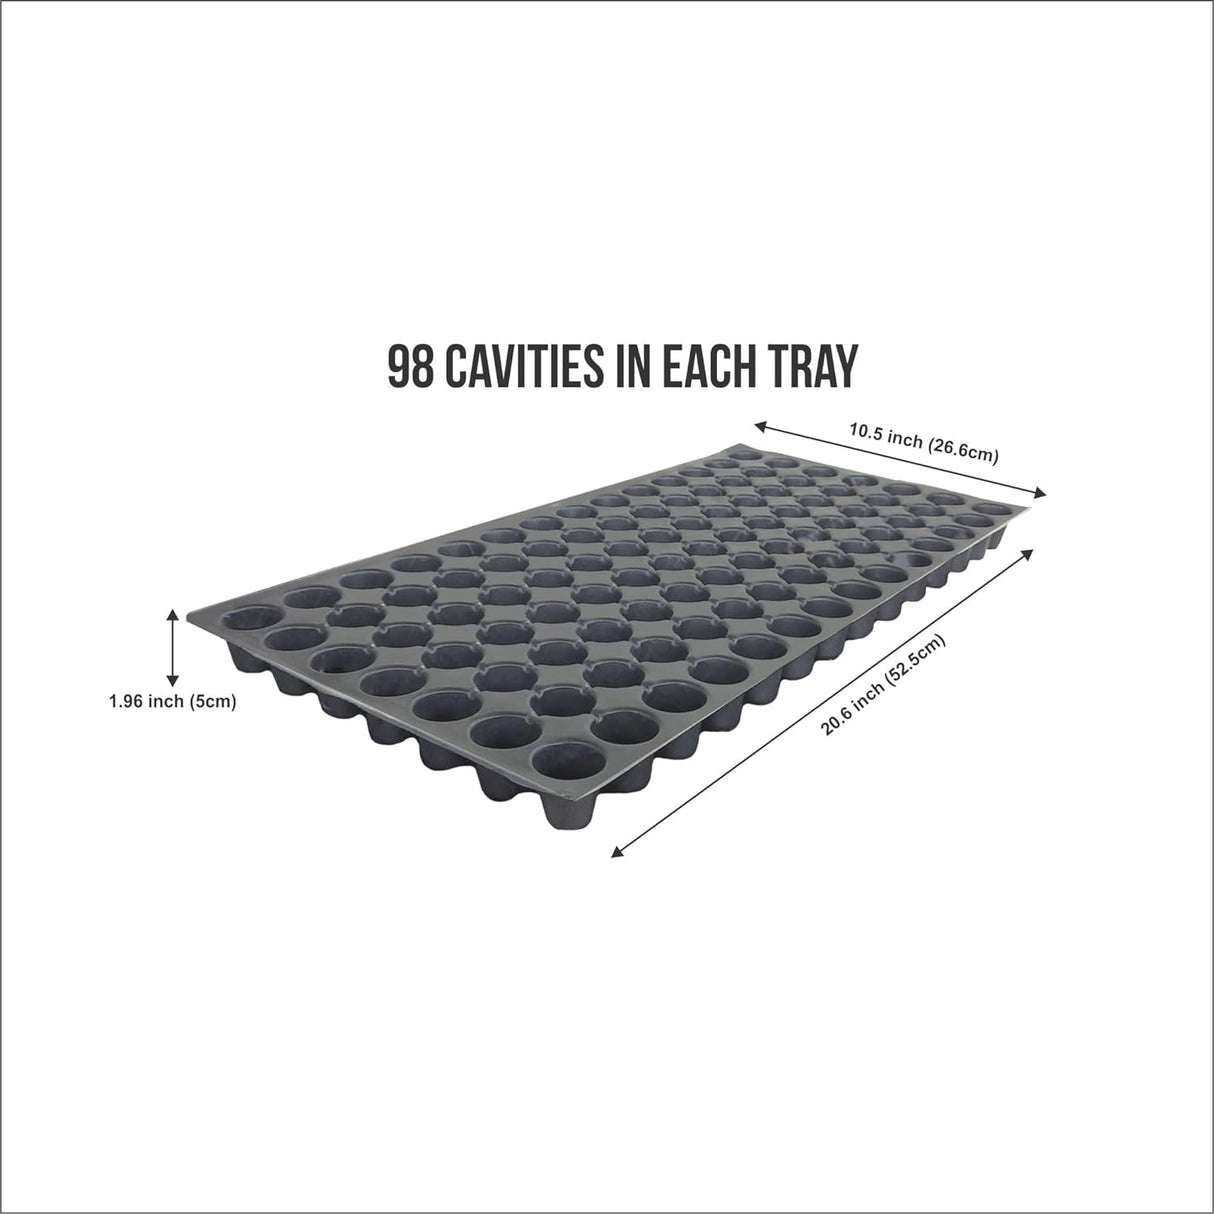 SINGHAL Seedling Tray - Pack of 12 (Black, 98 Holes) Germination Trays for Seedling, Nursery Trays for Plants, Reusable Plastic Trays for Garden Plantation, 98 Cavities Tray for Seeding